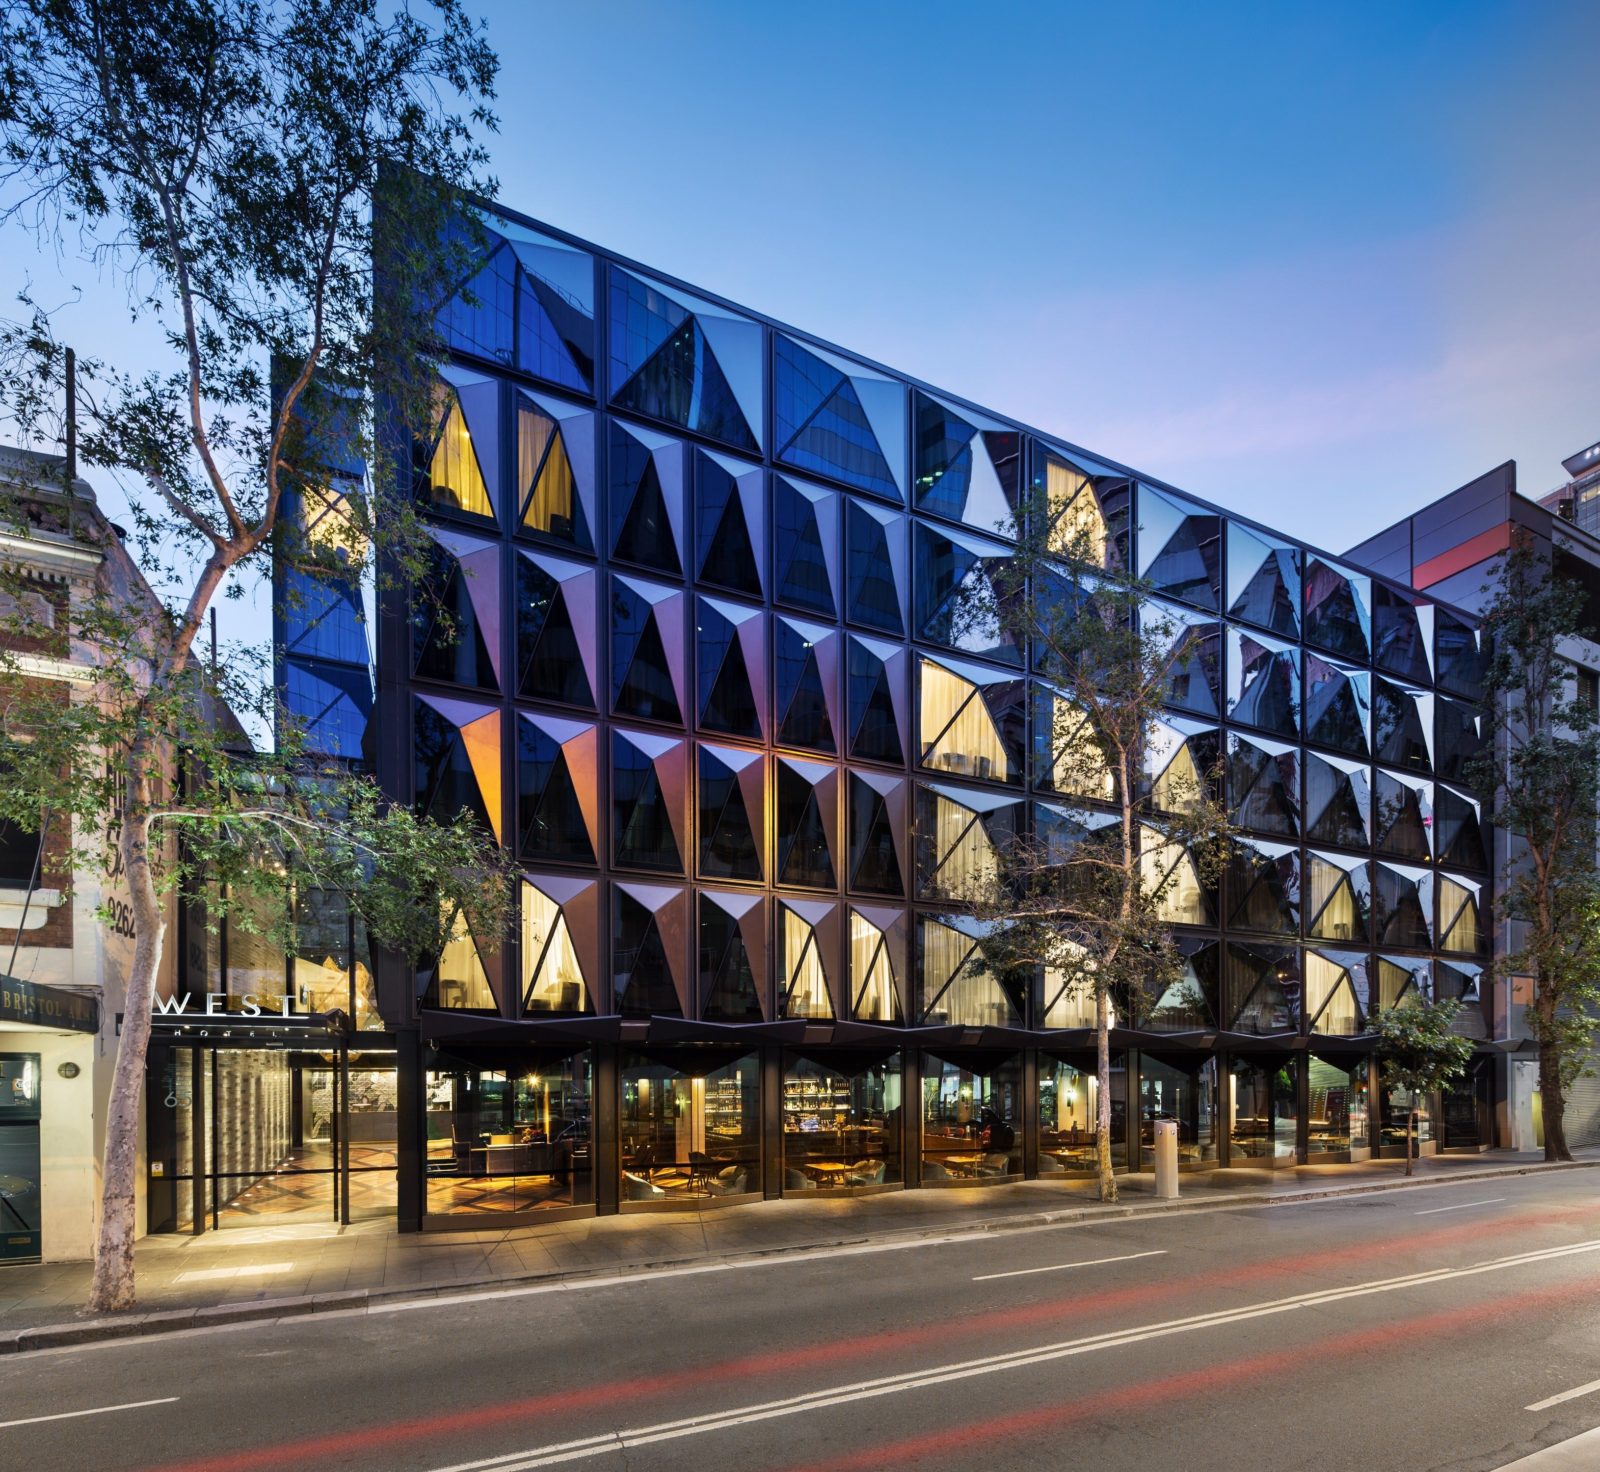 West Hotel is located in Sydney's CBD on Sussex Street, near Barangaroo and Darling Harbour